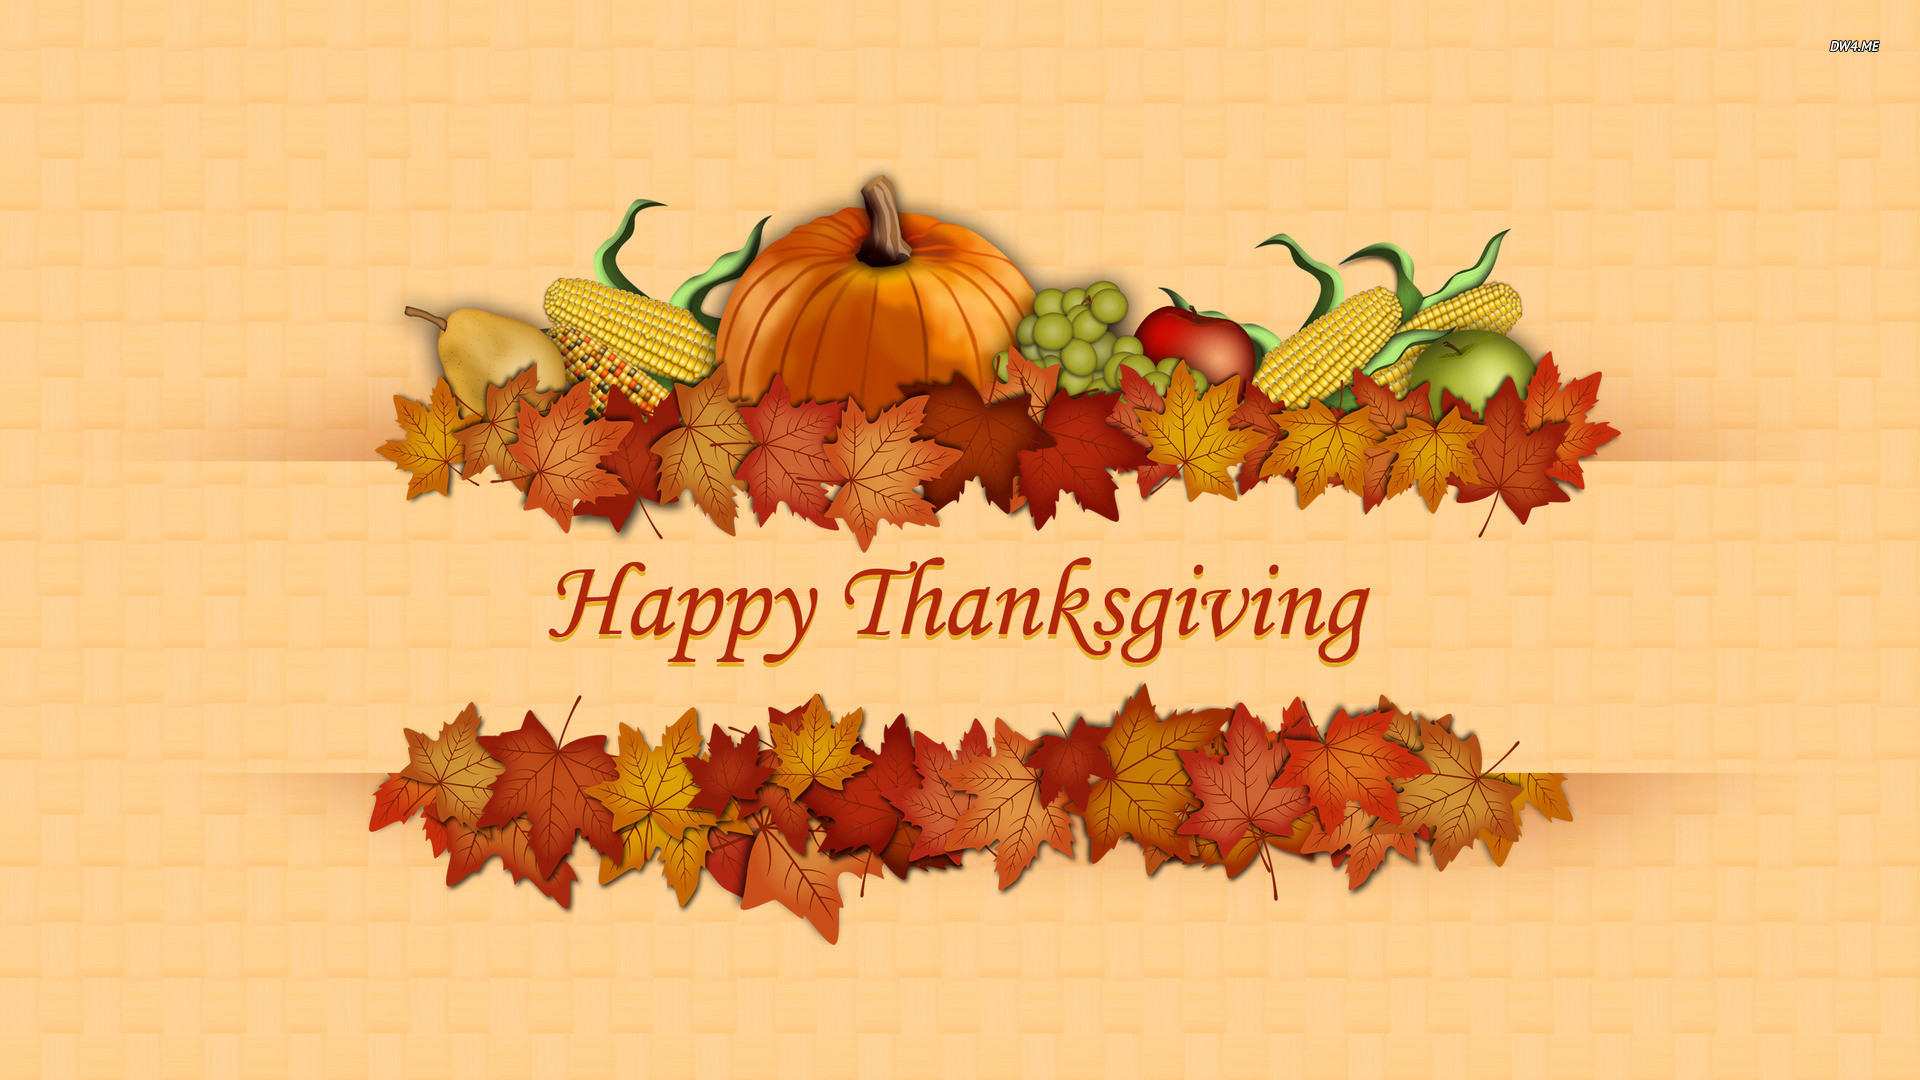 1920x1080 Free Thanksgiving Wallpapers for iPad iPad 2: Giving Thanks | Epic Car  Wallpapers | Pinterest | Thanksgiving wallpaper and Wallpaper